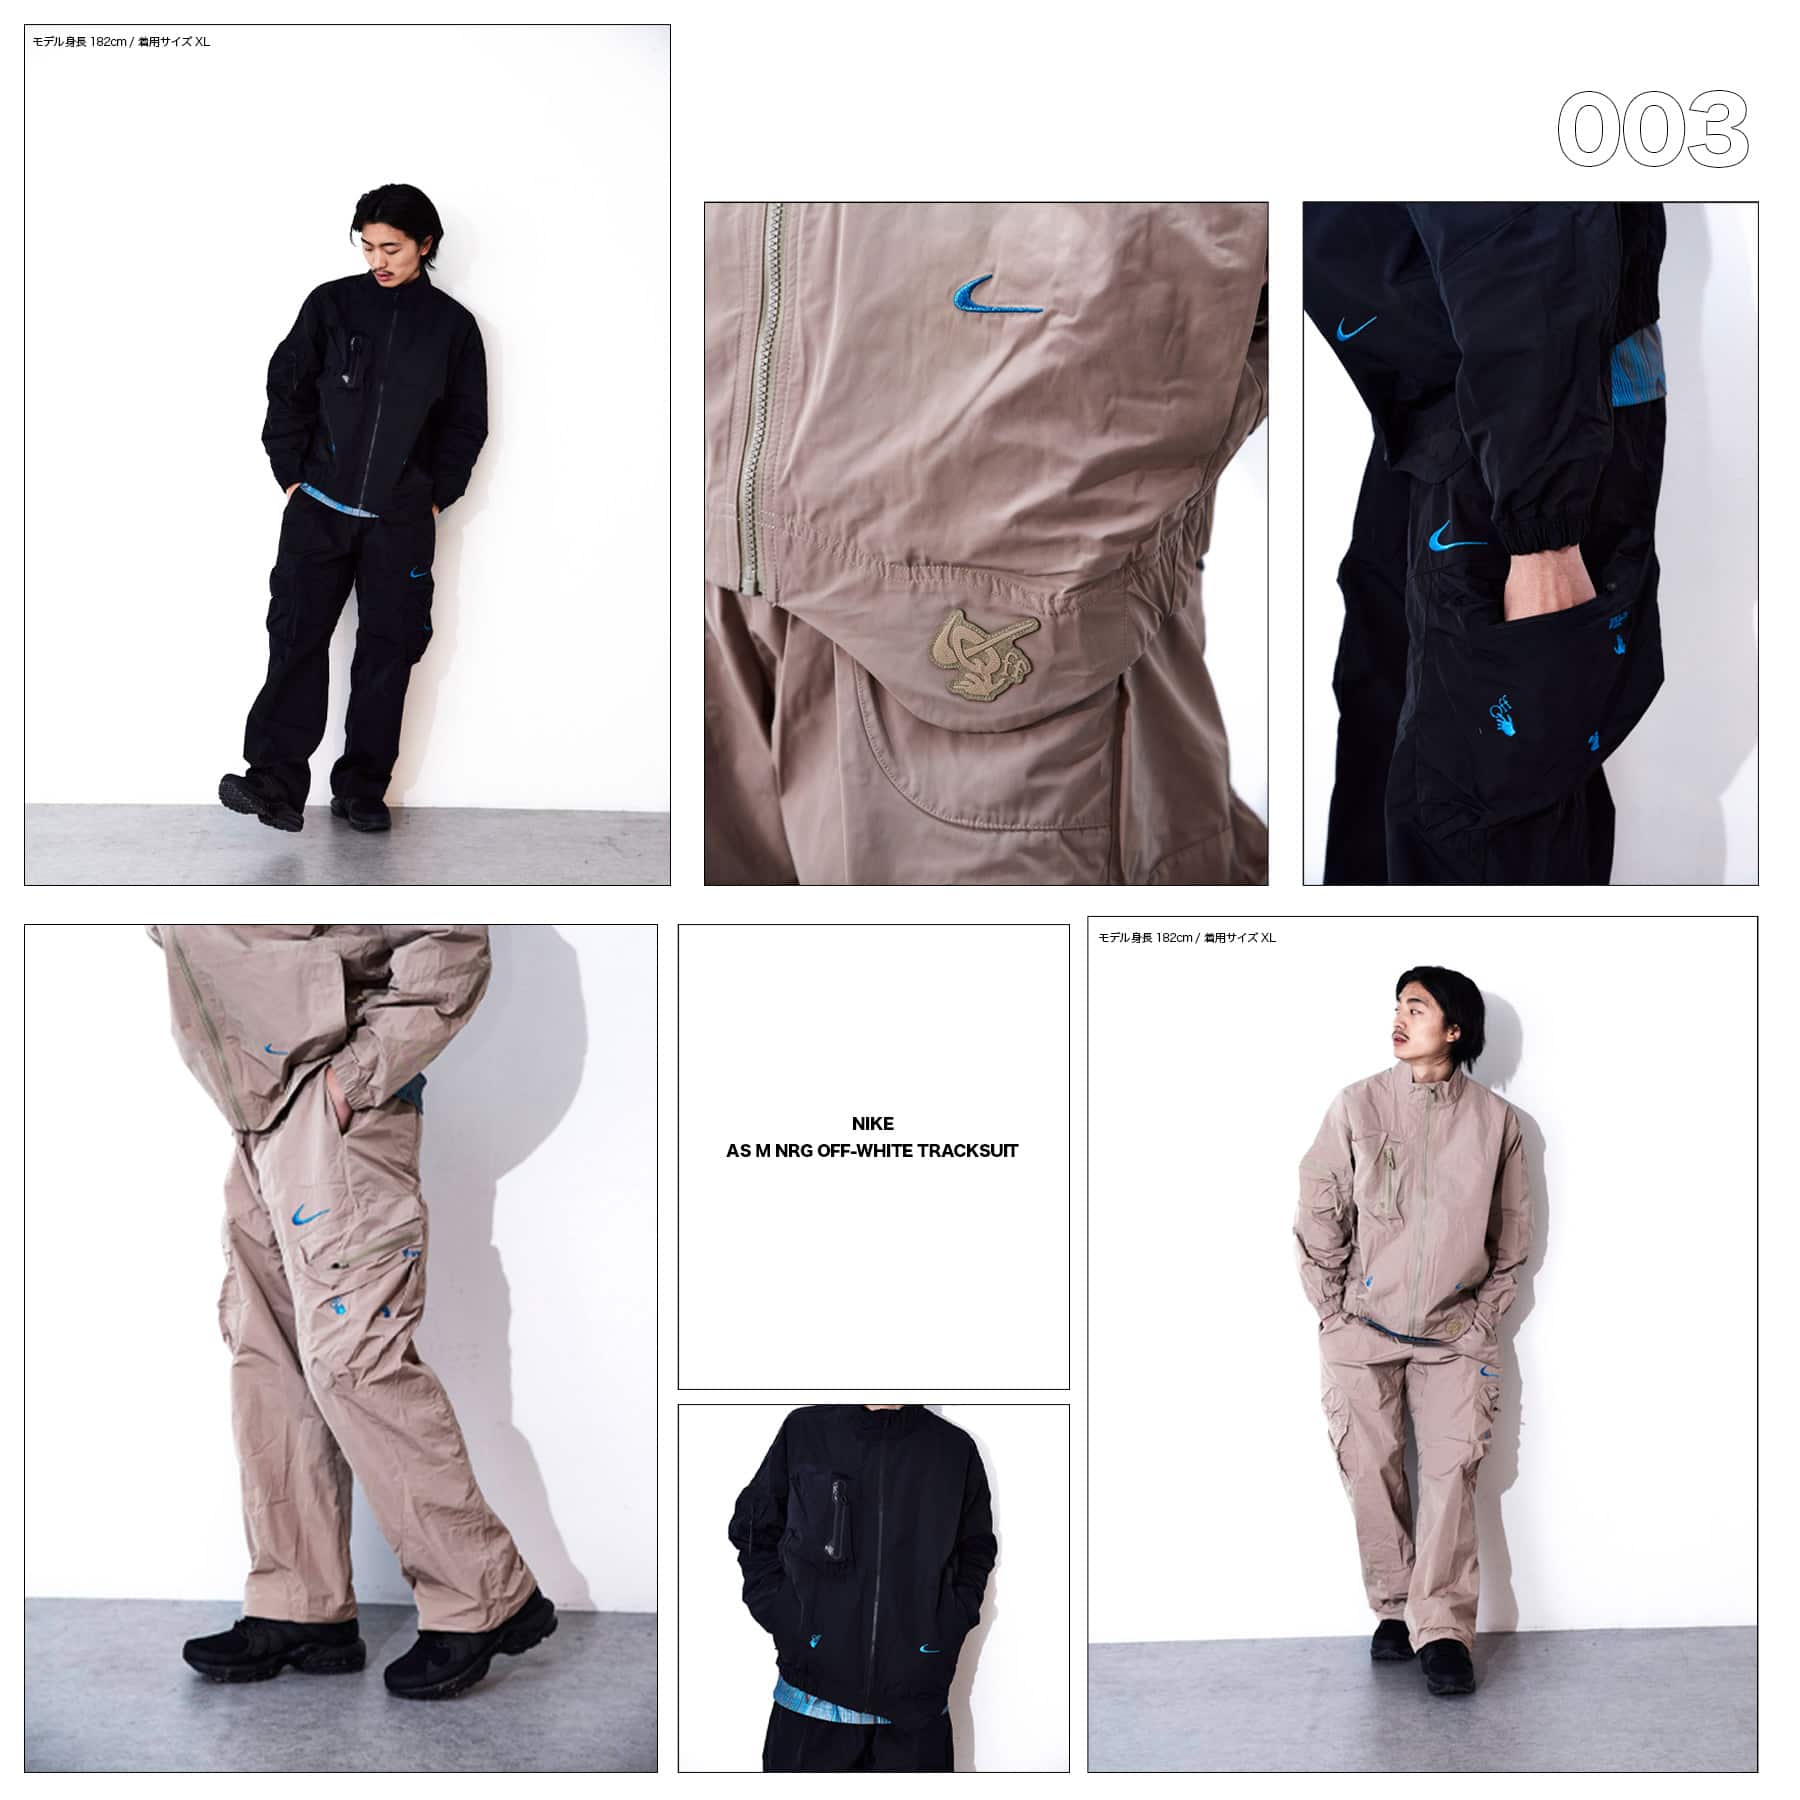 Nike x Off-White Tracksuit 003 - その他